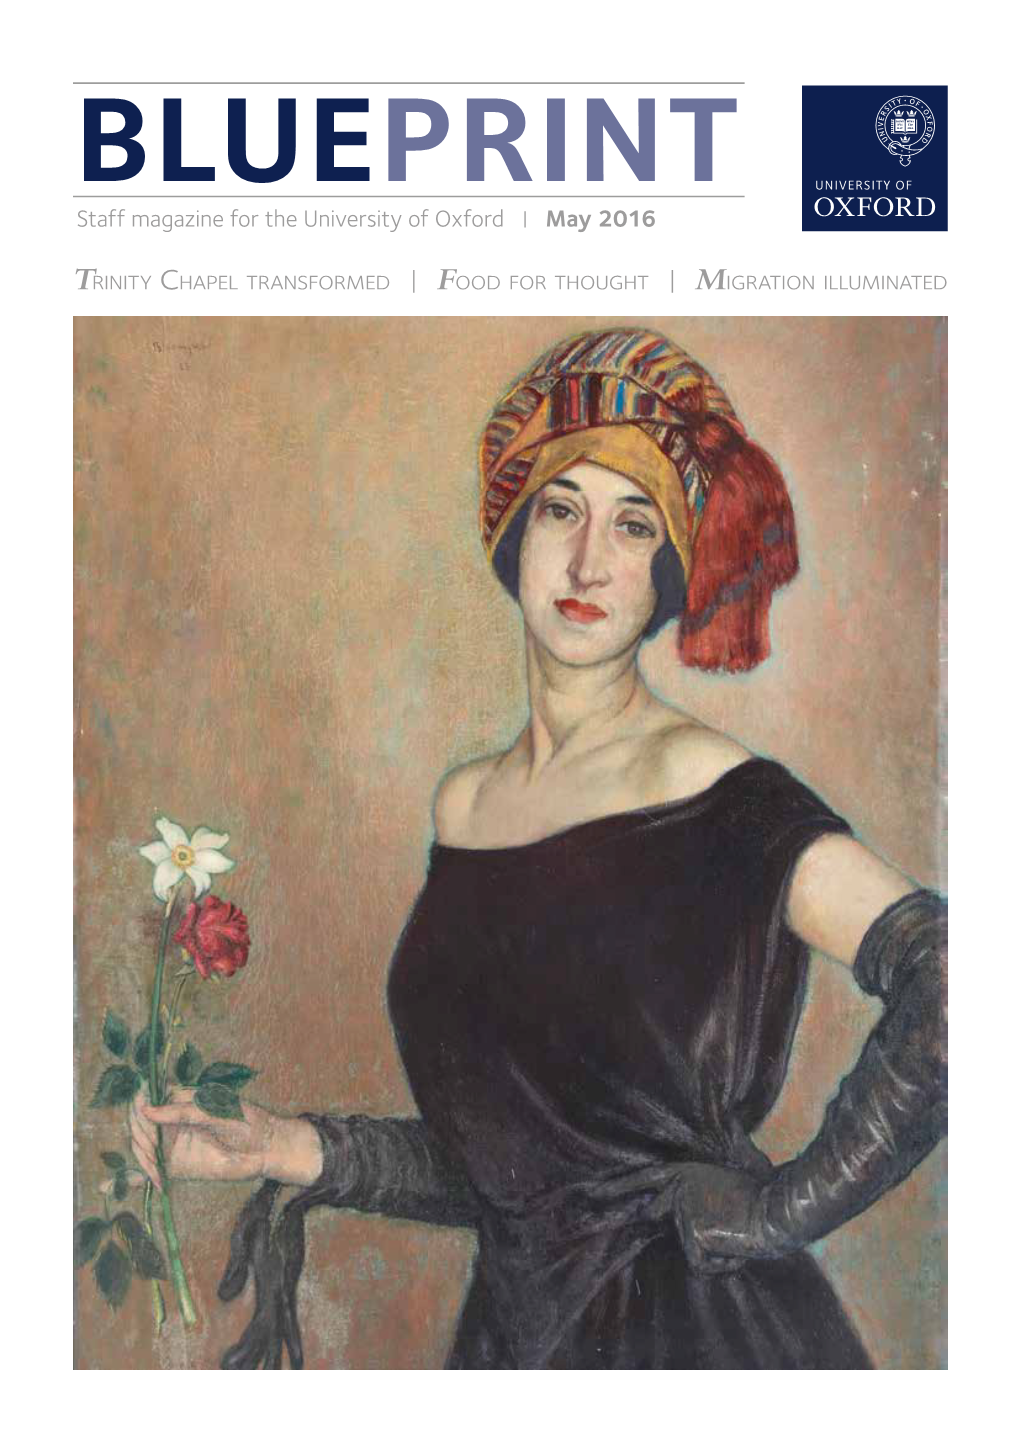 Staff Magazine for the University of Oxford | May 2016